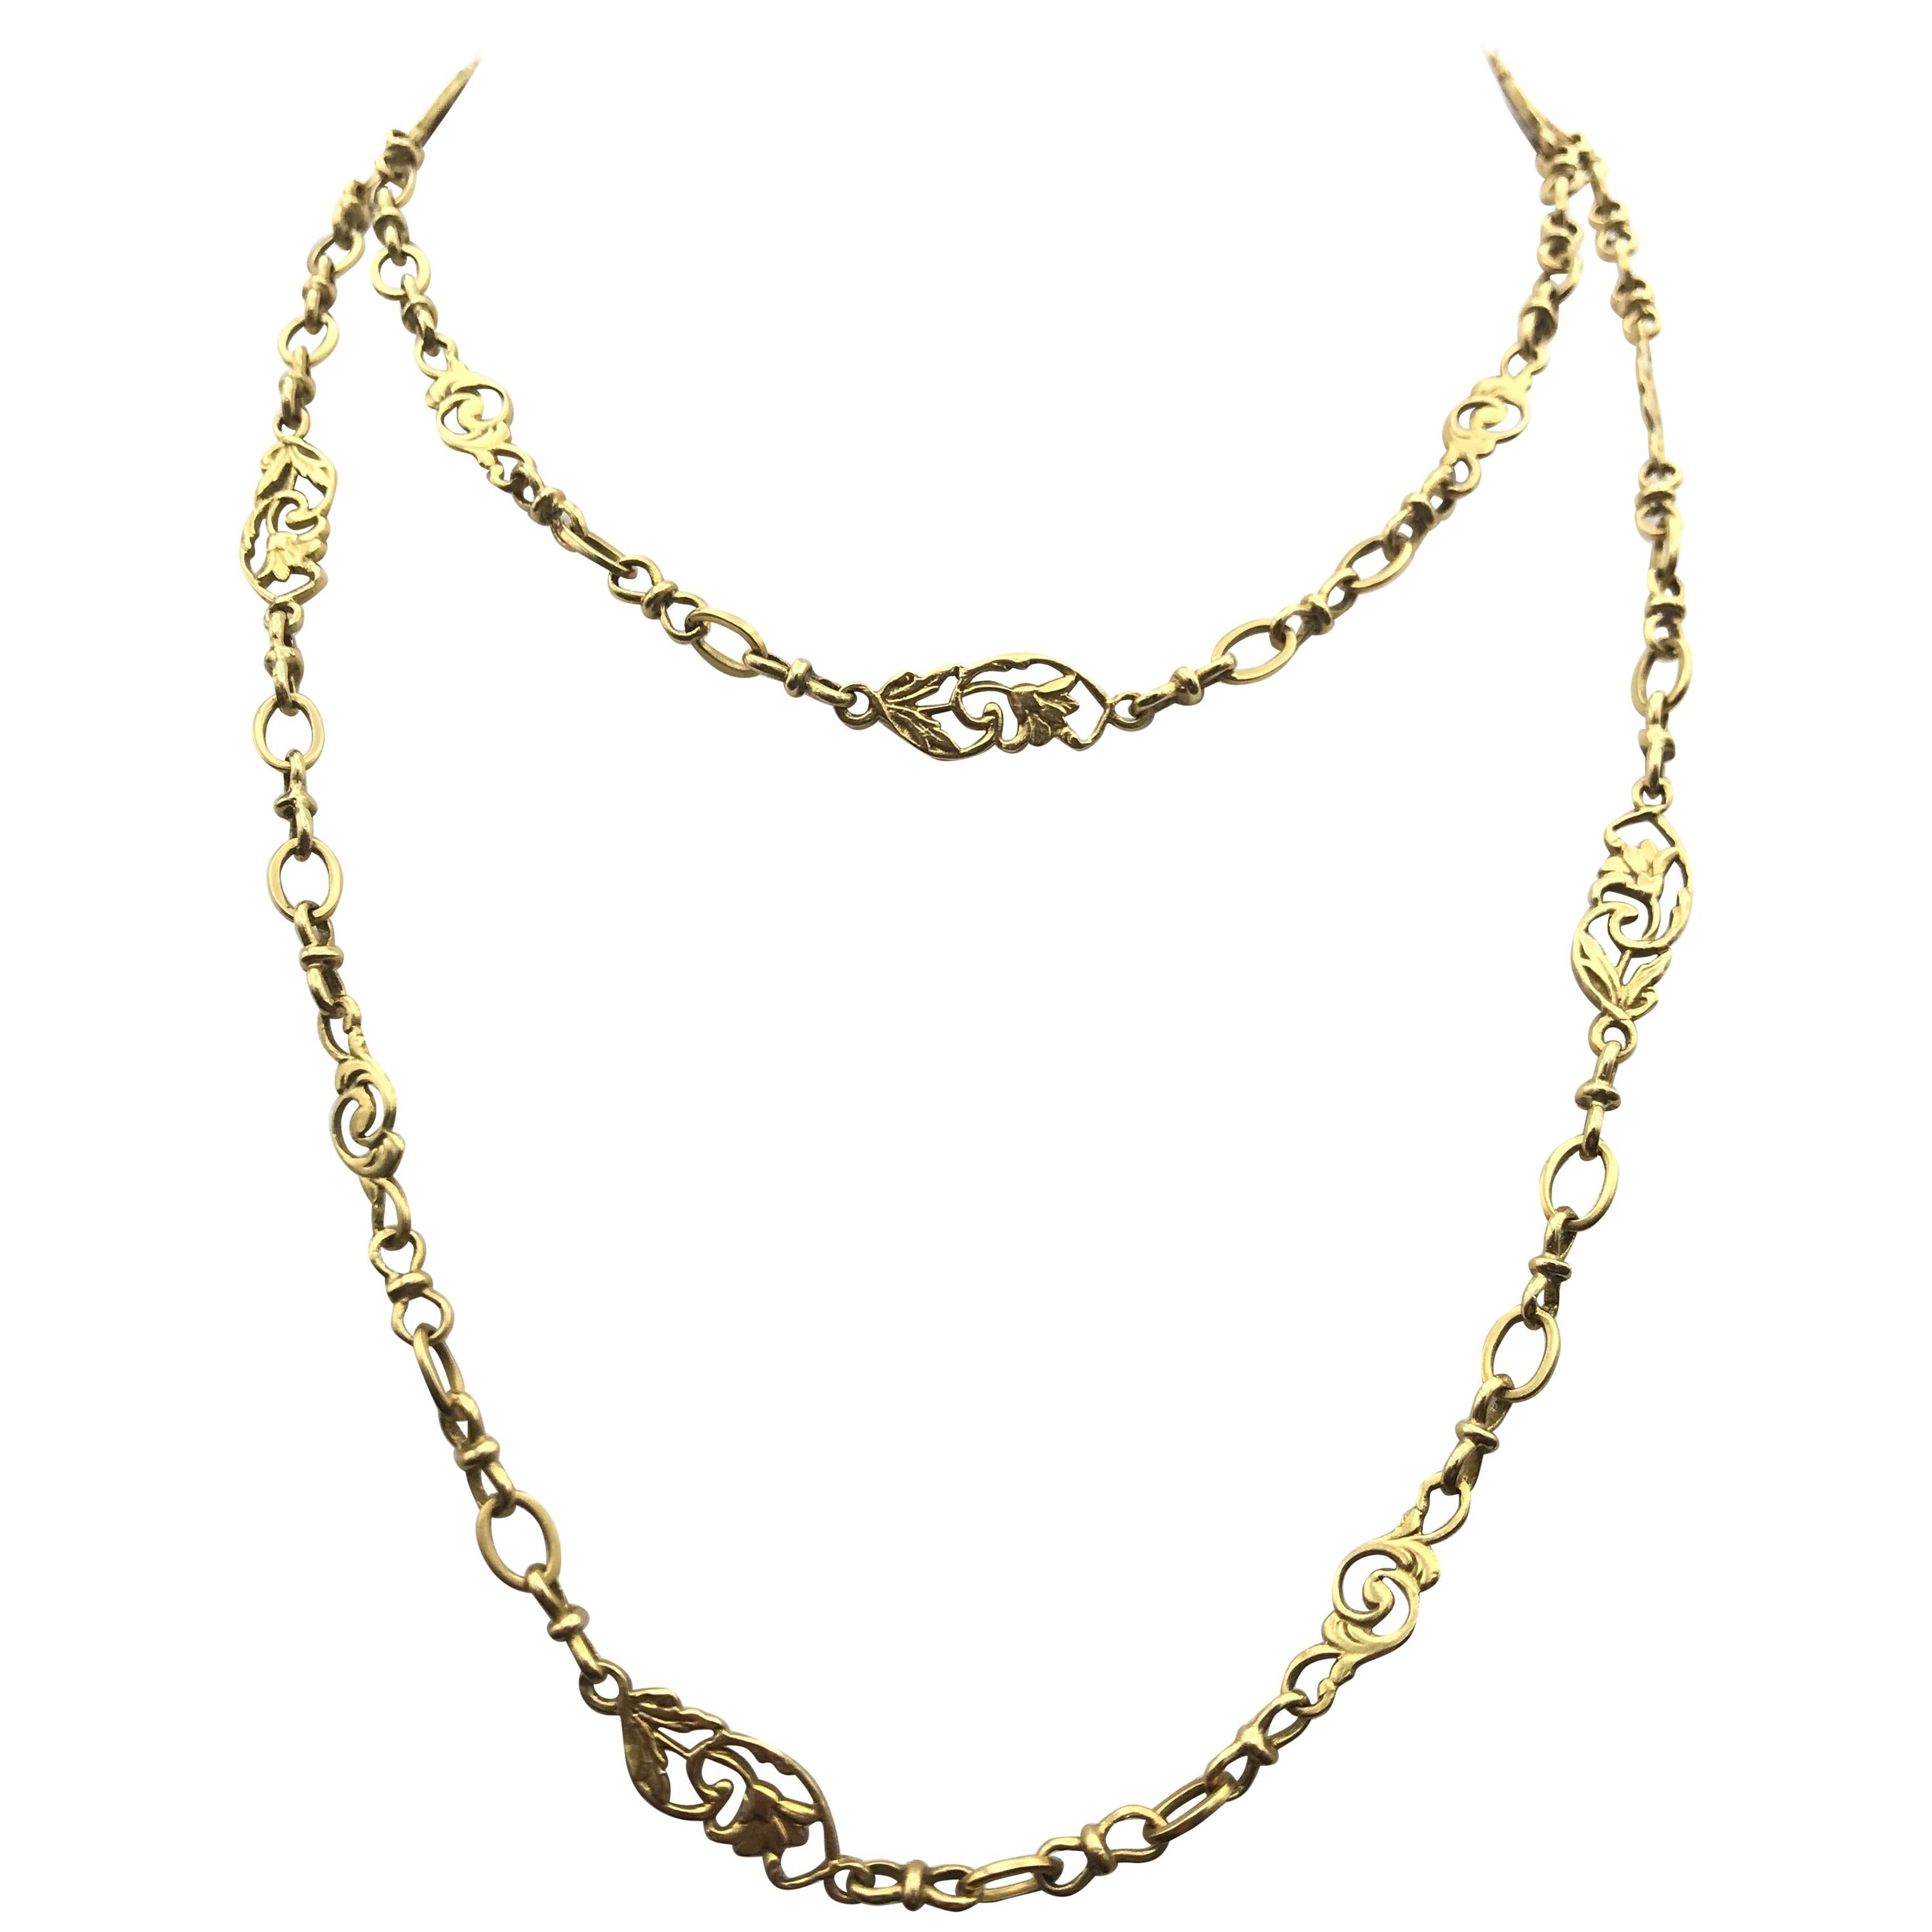 French Antique Sautoir Yellow Gold Chain Link Necklace with Lillies and Vines